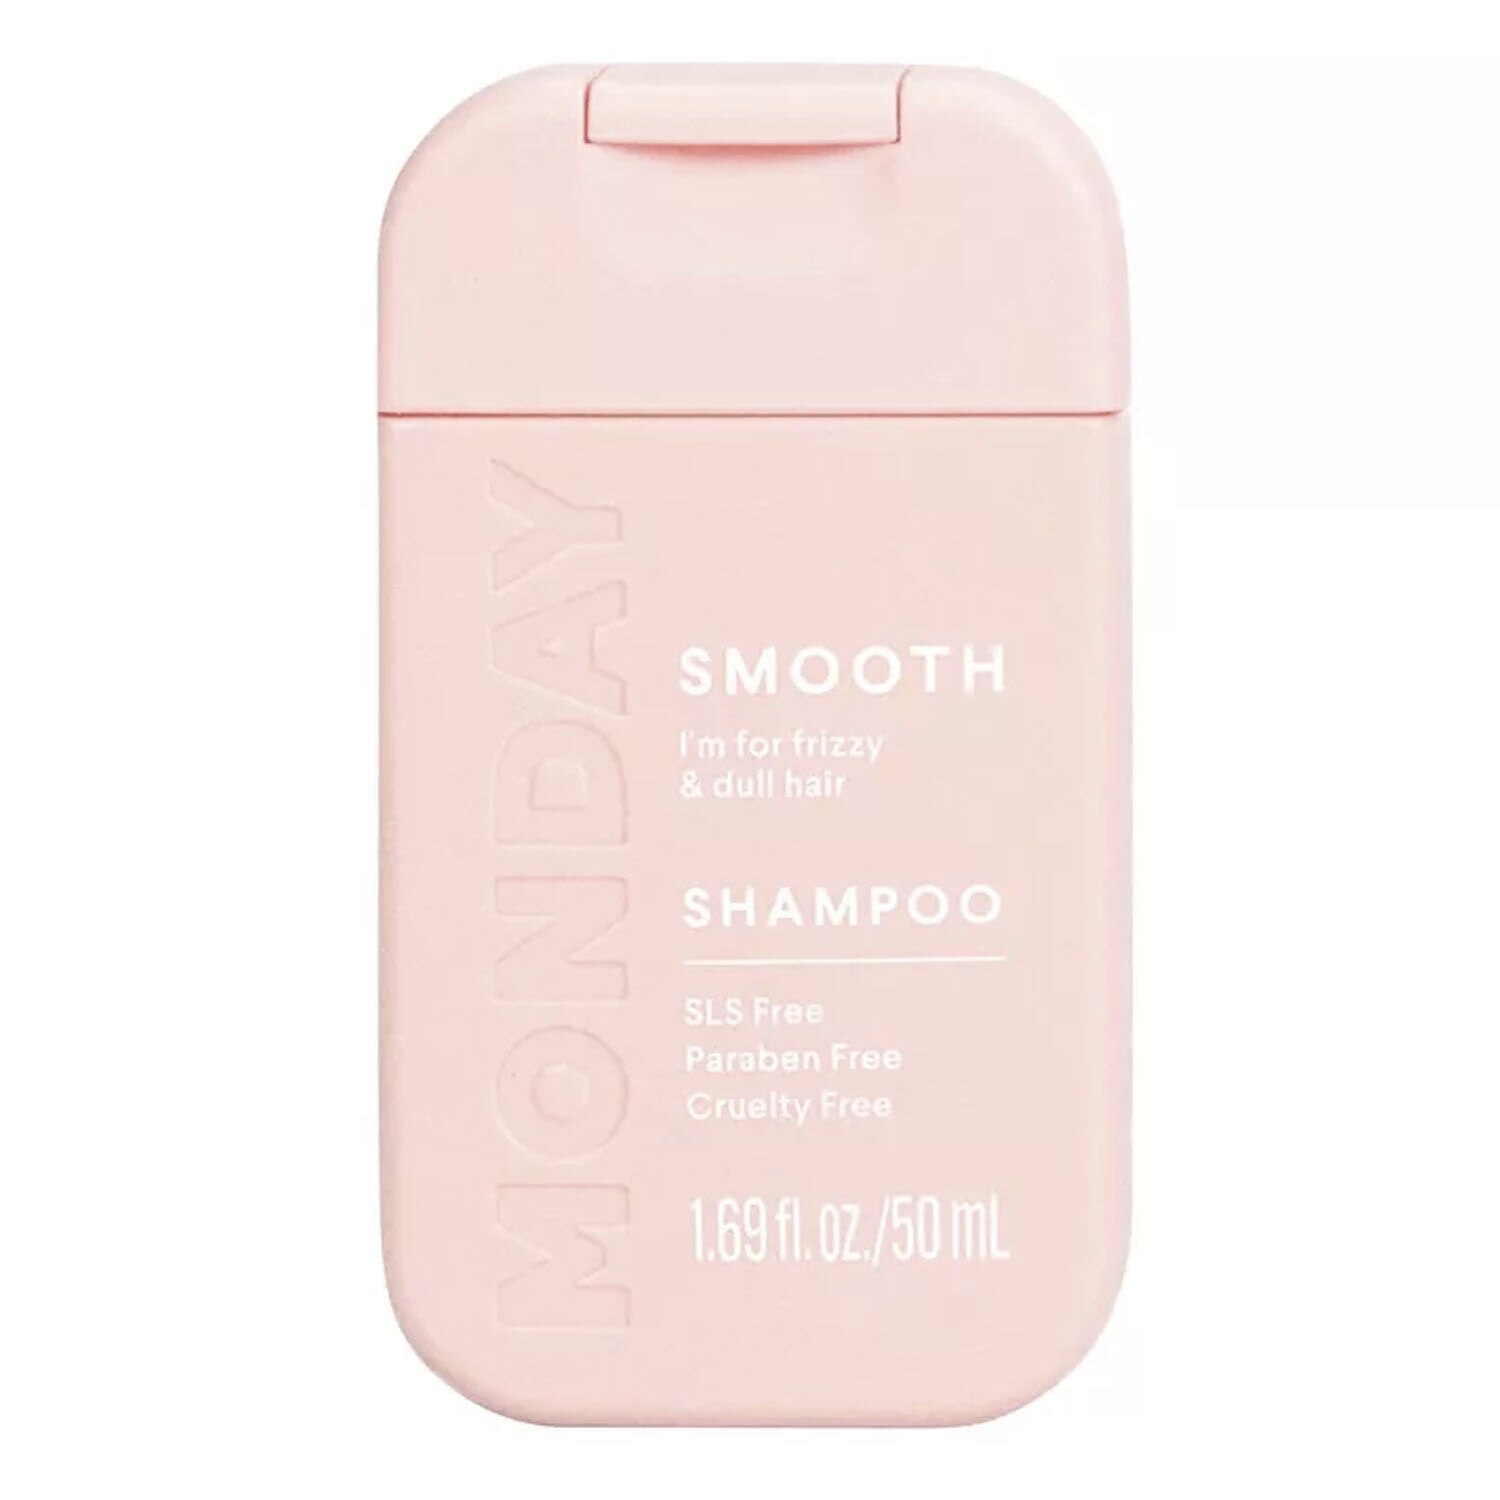 Monday Haircare Travel Size Smooth Shampoo Oz Pick Up In Store